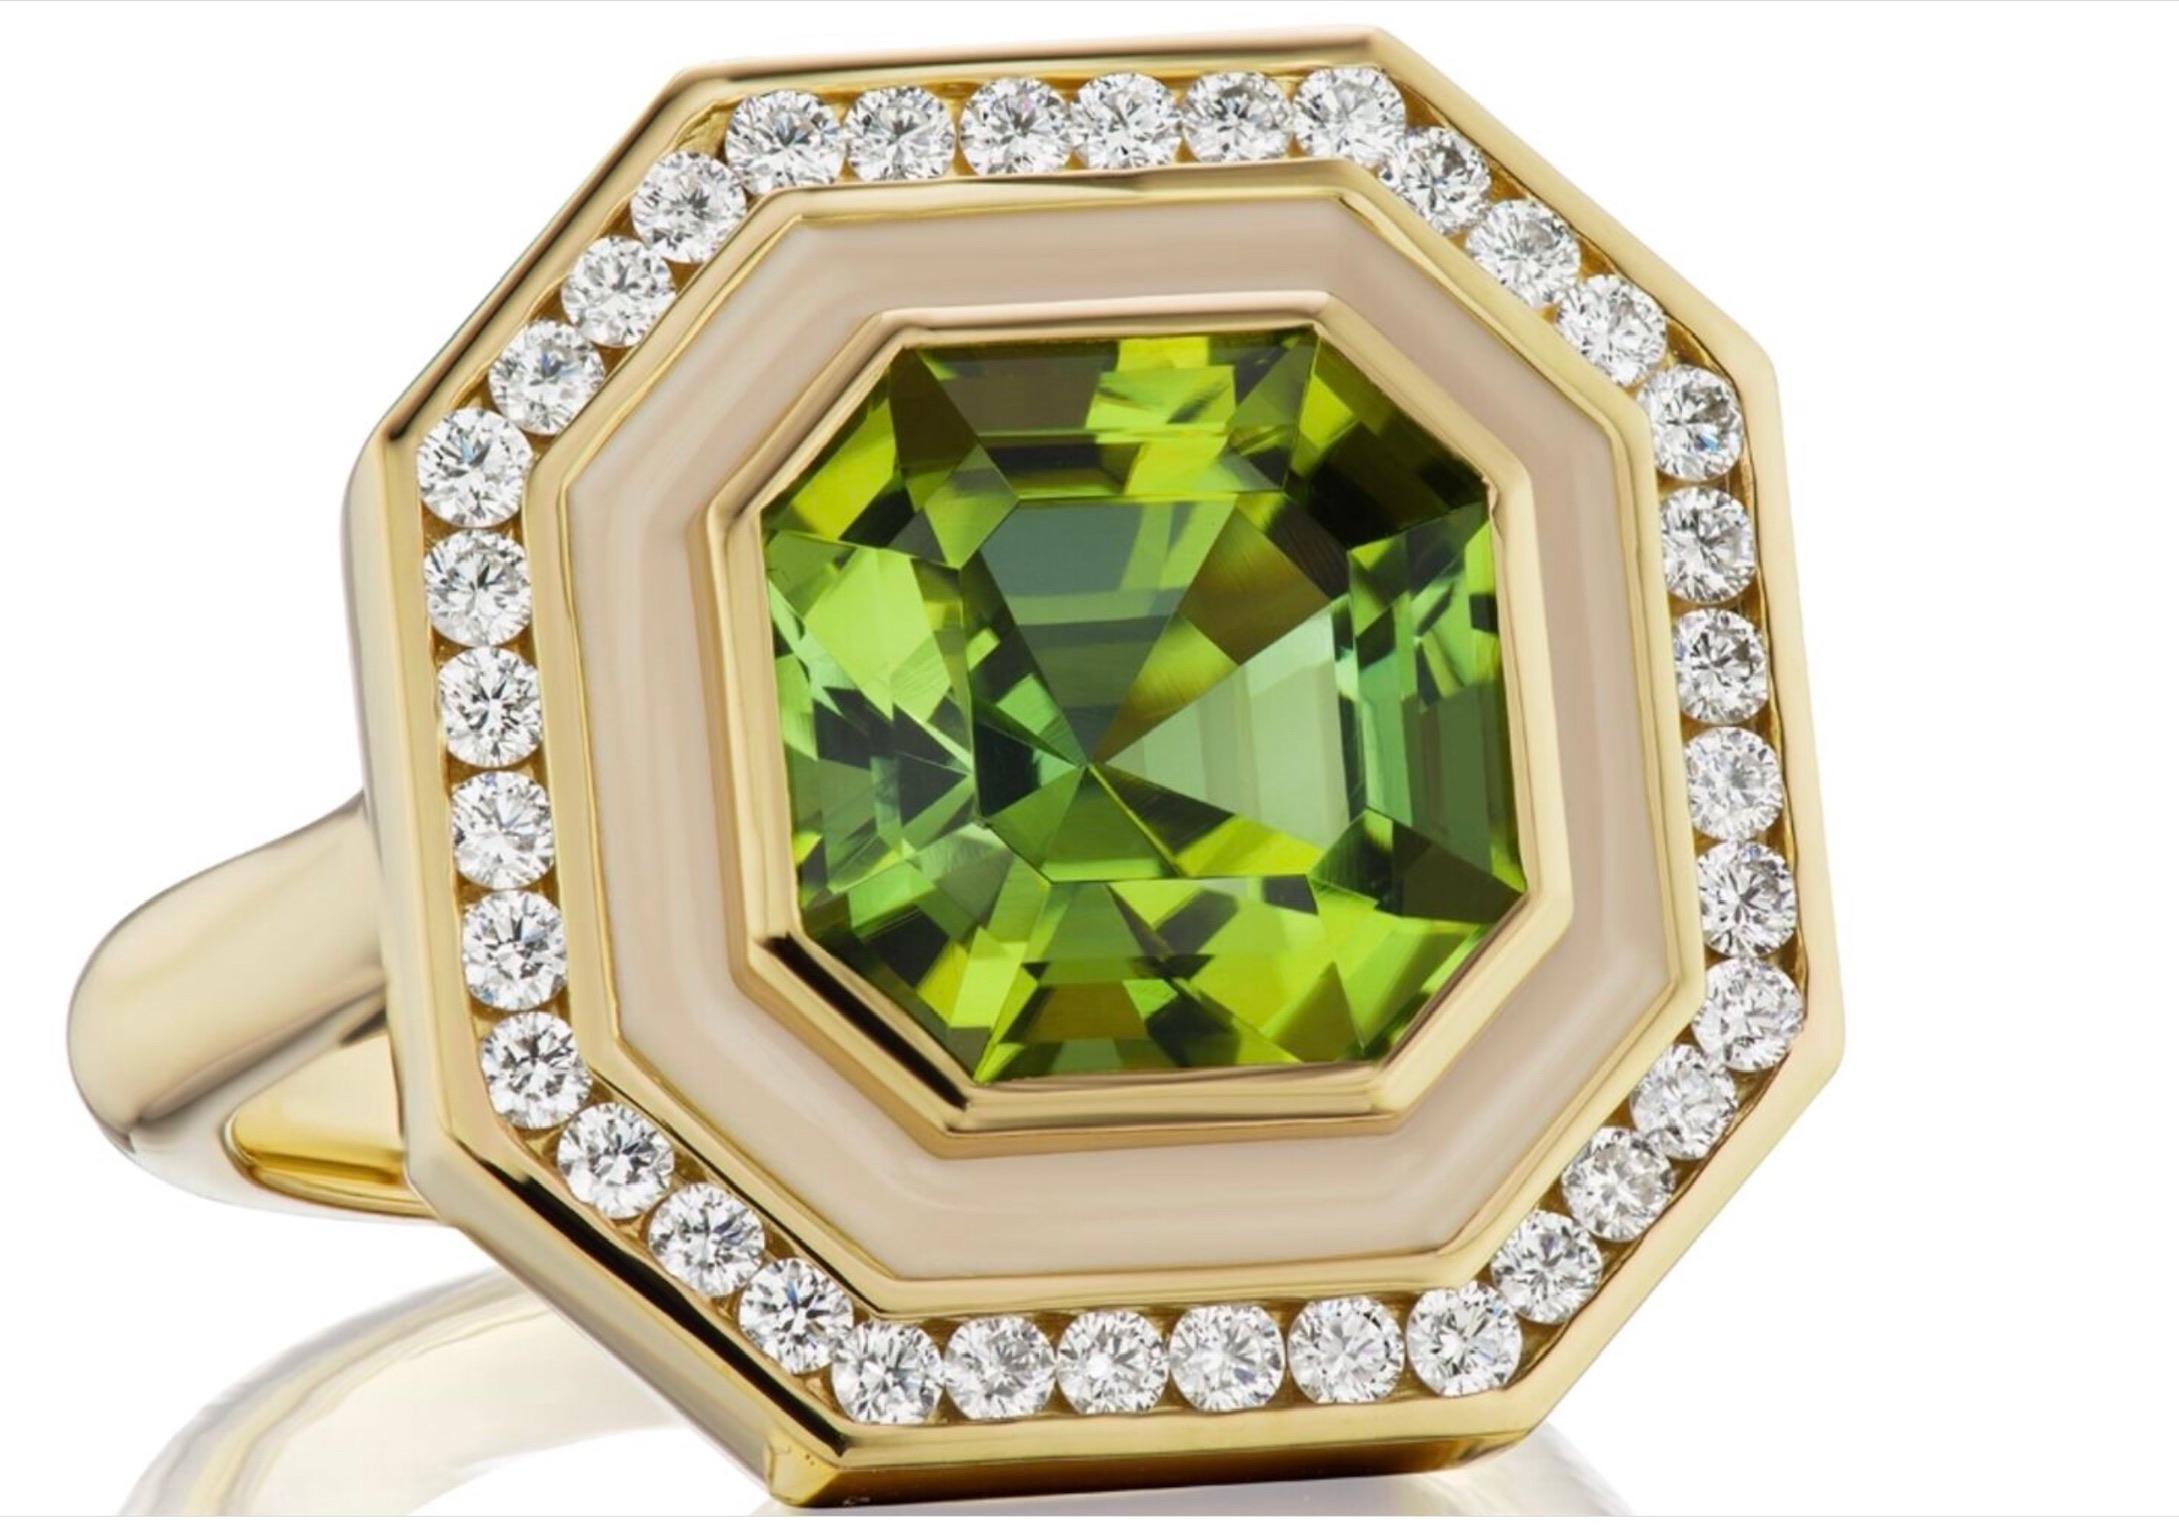 A sparkling, eye-clean, 5 carat Asscher cut Green Tourmaline. It is a mesmerizing stone that has been set and surrounded by .50 ctw of GH VSI Diamonds, followed by a border of cream colored enamel. This ring is set in 18K Yellow Gold and is a size